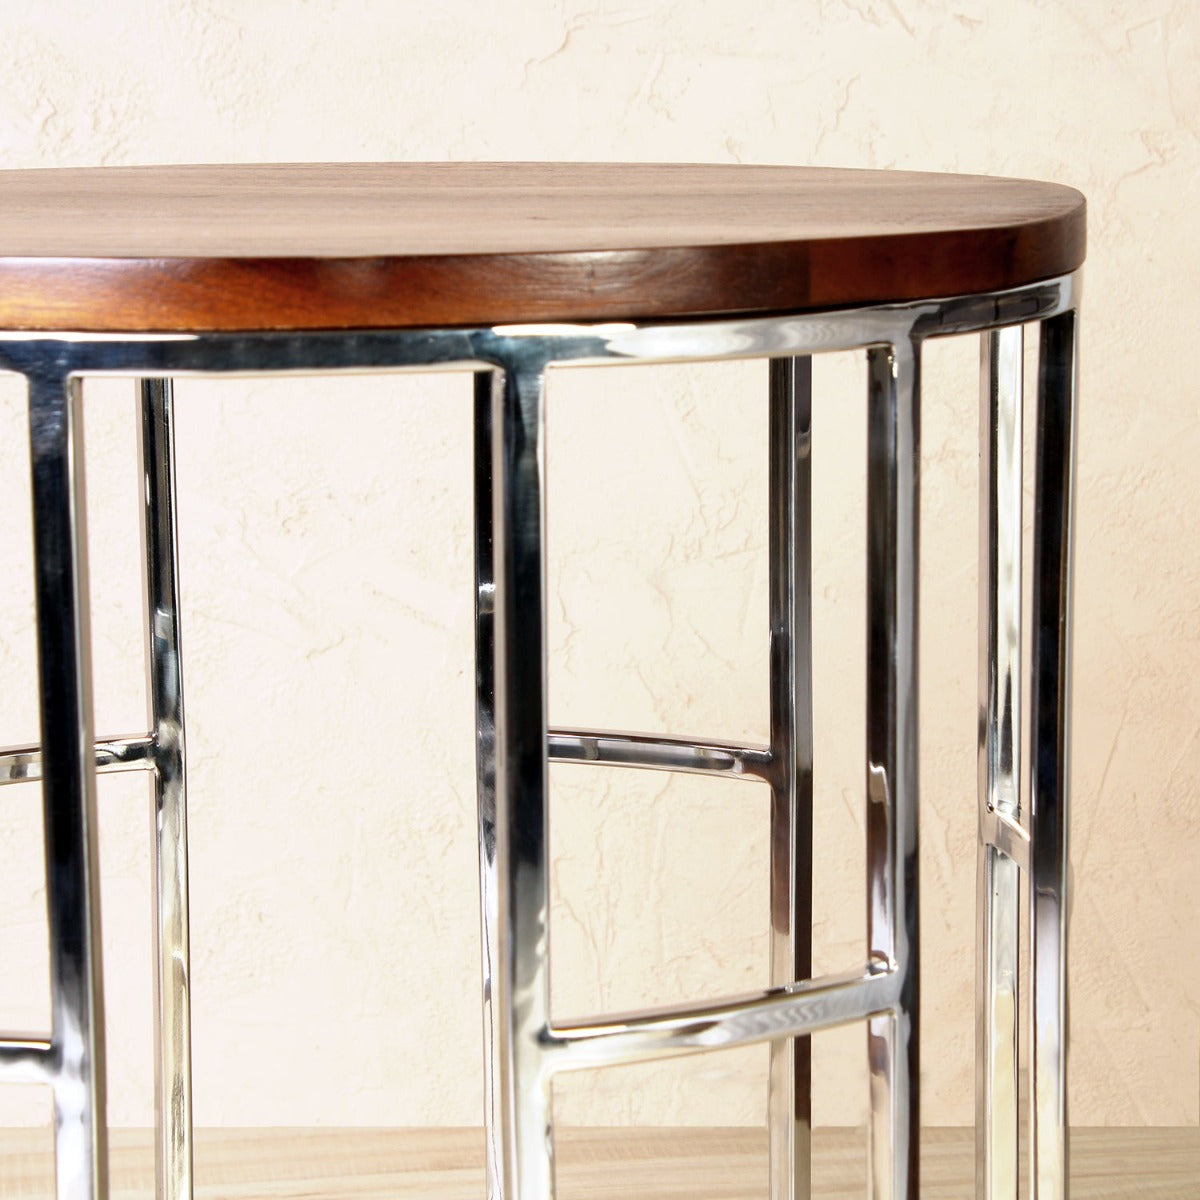 Cassuis Wooden Side Table In Chrome Finish